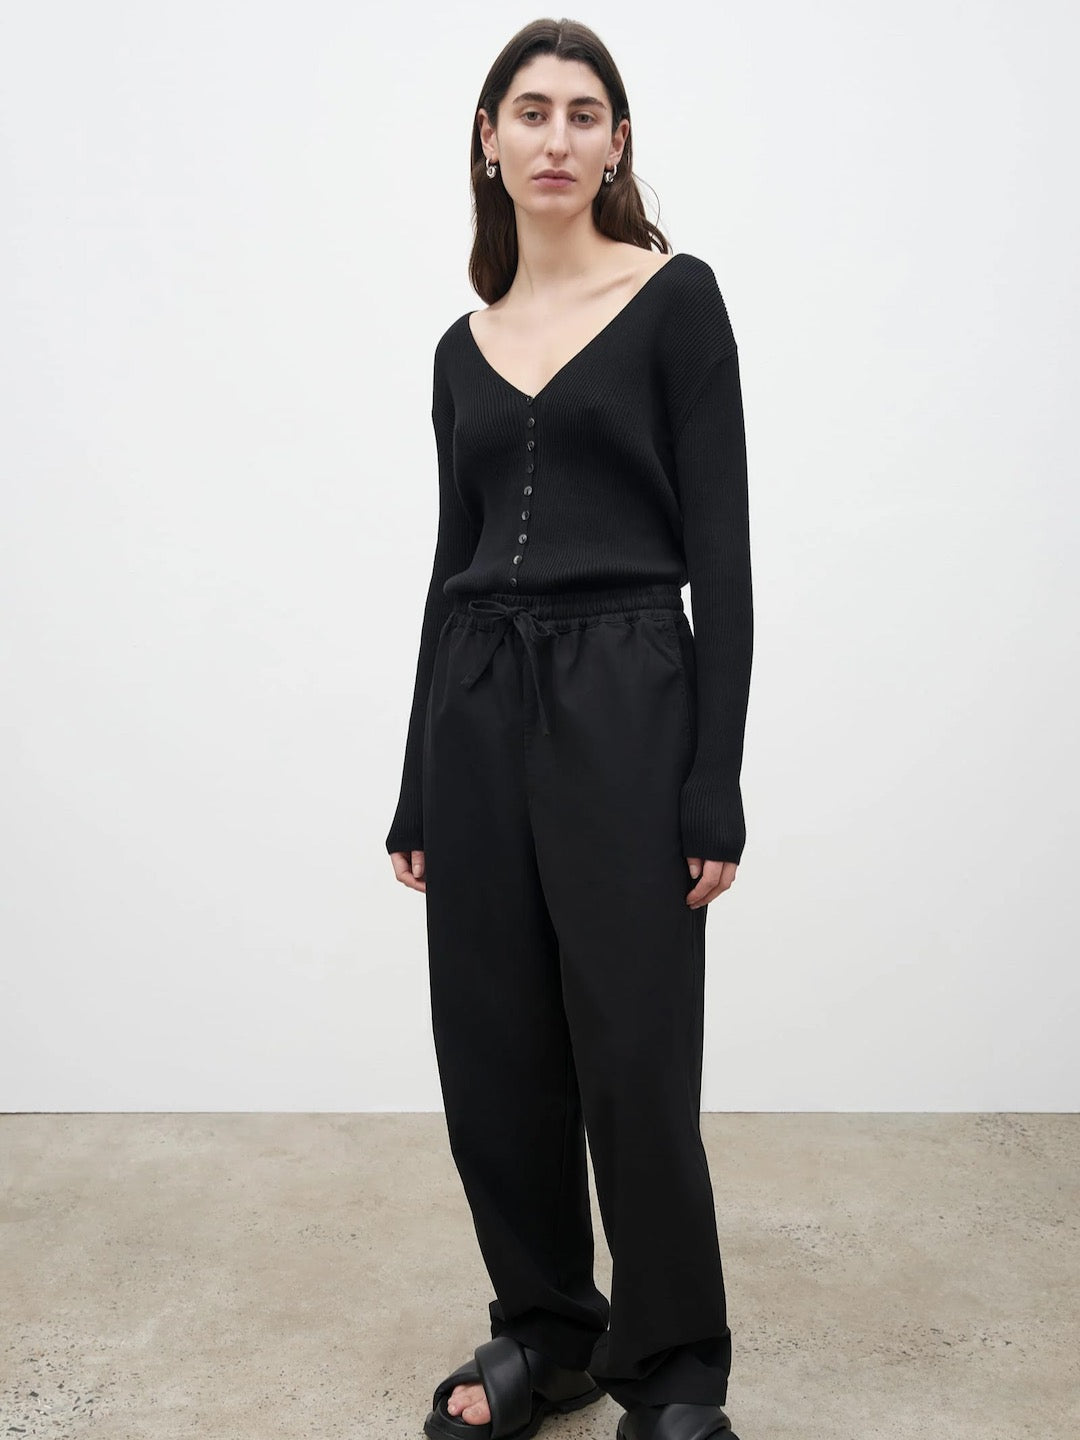 The model is wearing a black v - neck sweater and Kowtow's Blake Pants – Black.